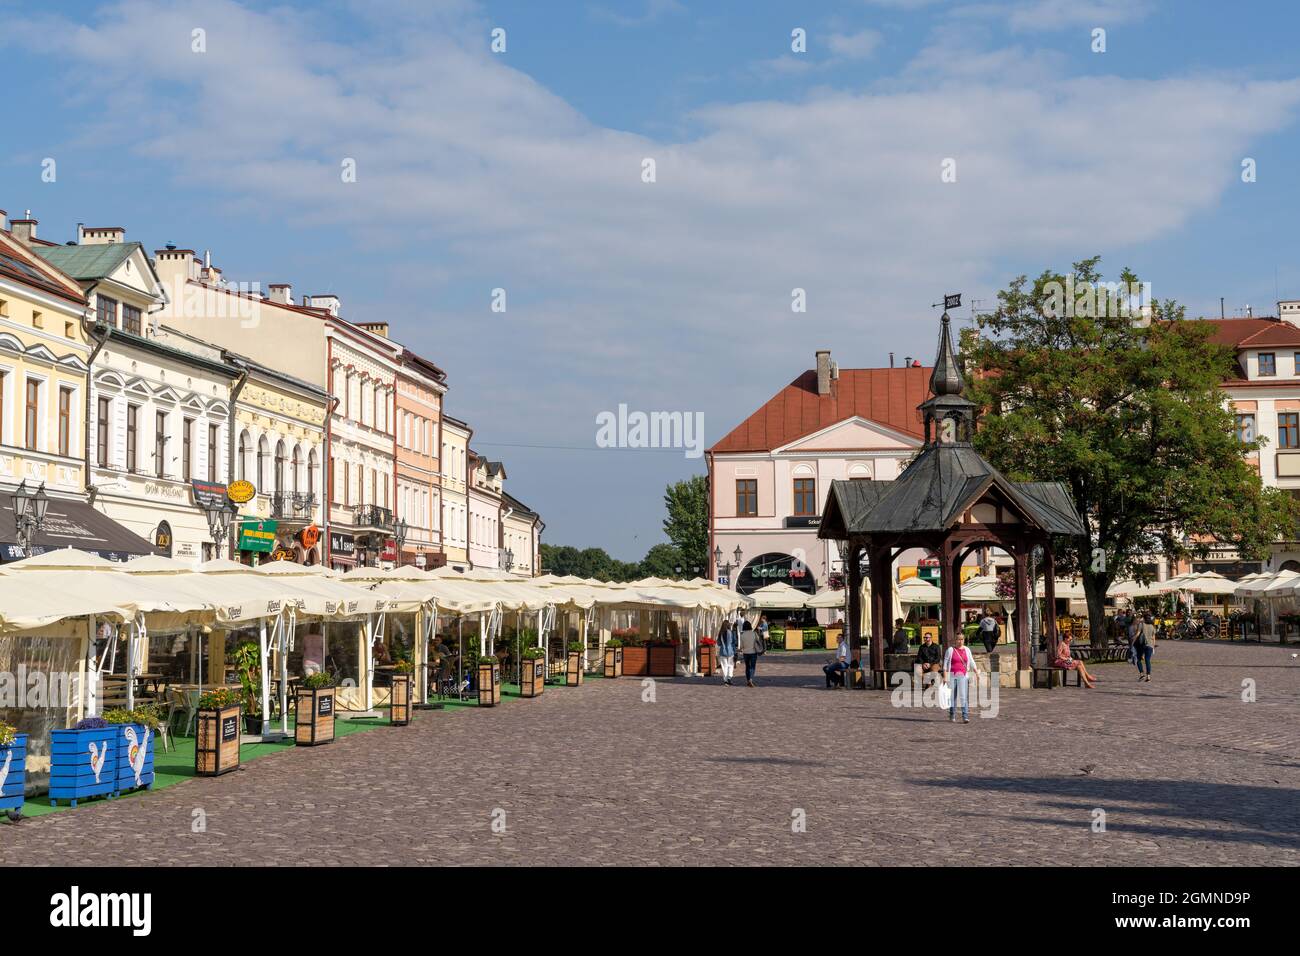 Rzeszow, Poland - 14 September, 2021: view of the market square in the historic old town city center of Rzeszow Stock Photo